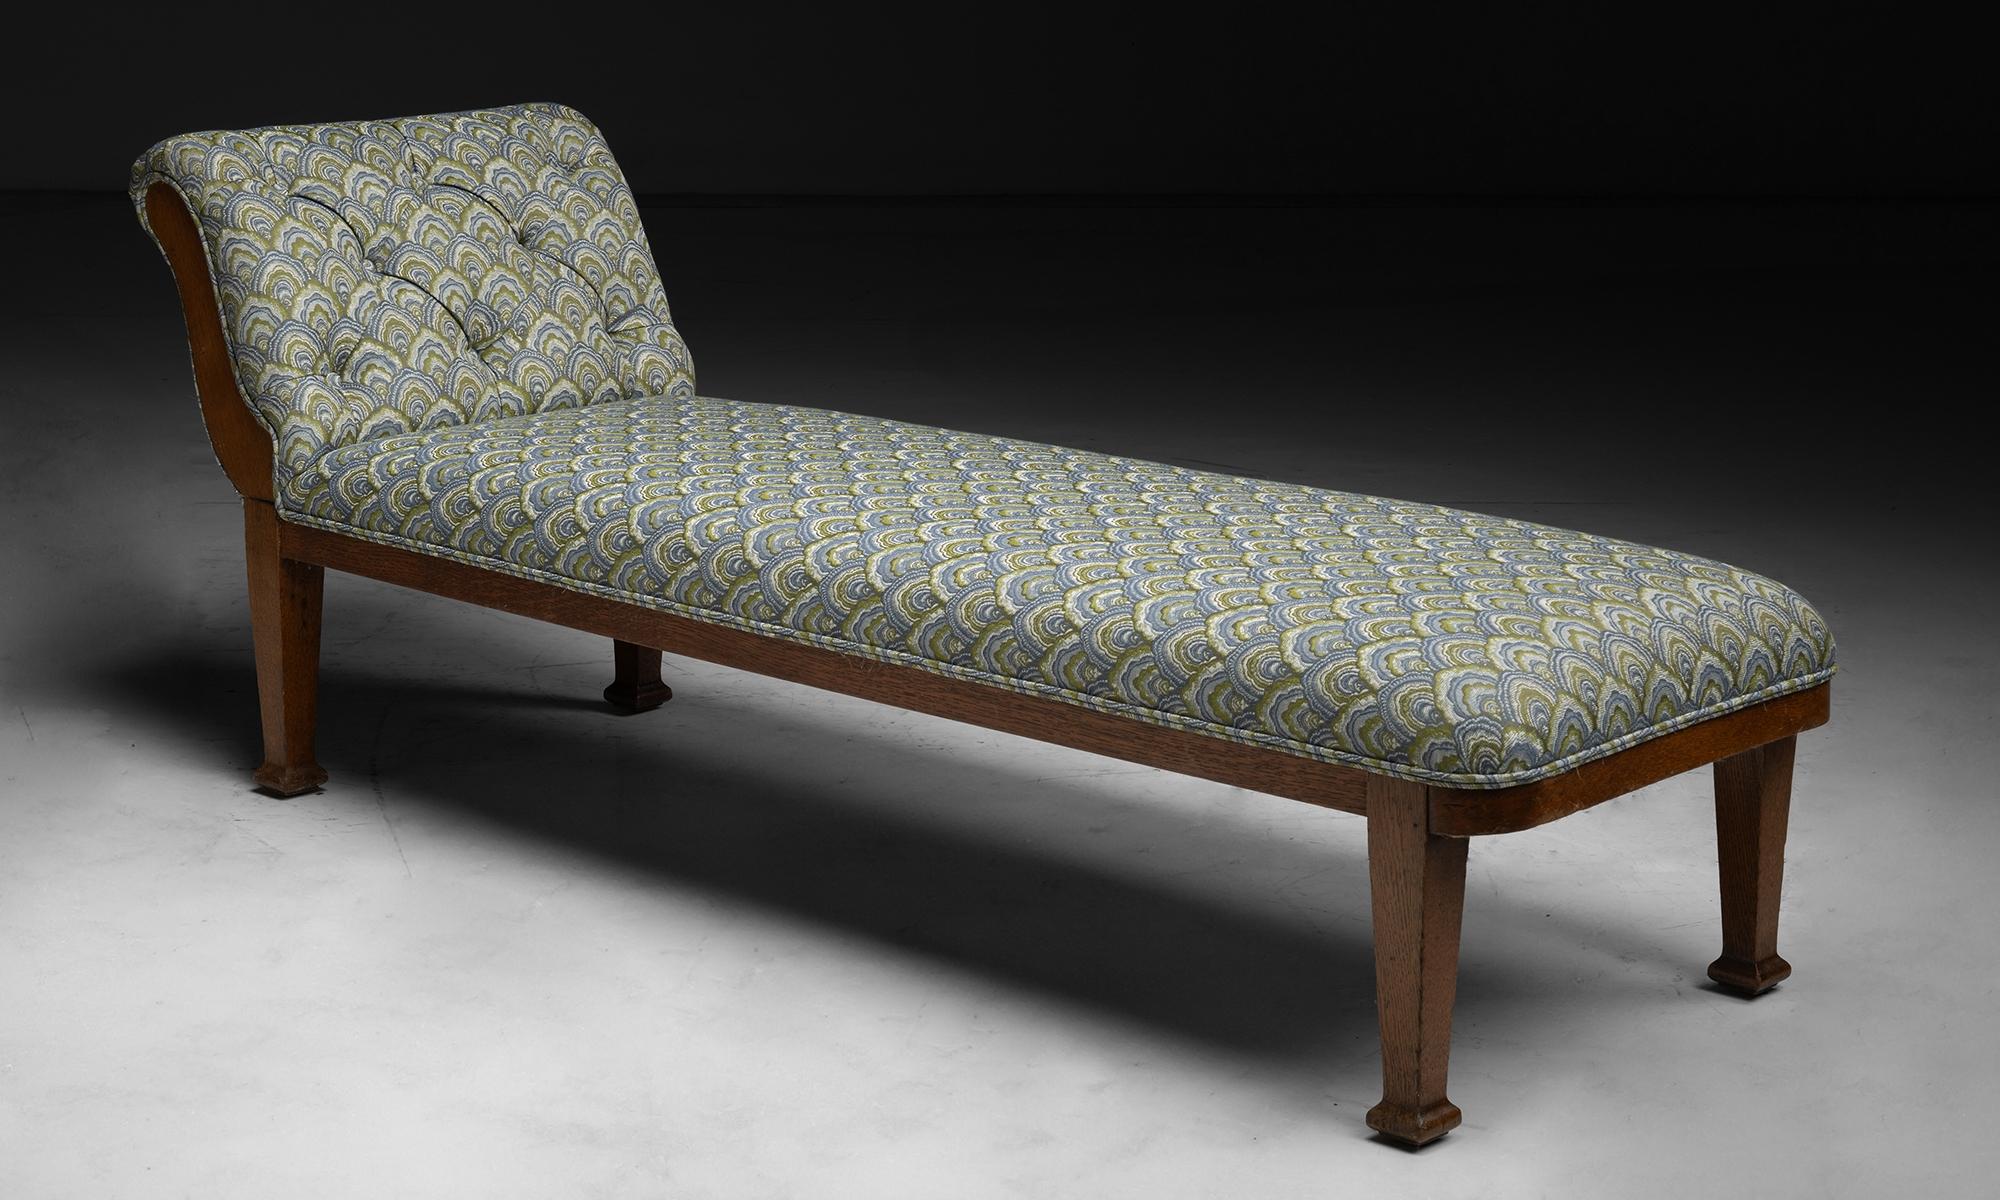 Oak Daybed in Pierre Frey Linen

England circa 1900

Newly upholstered inLinen Blend by Pierre Frey.

24”w x 74”d x 28.5”h x 16”seat

Ref. SOFA262